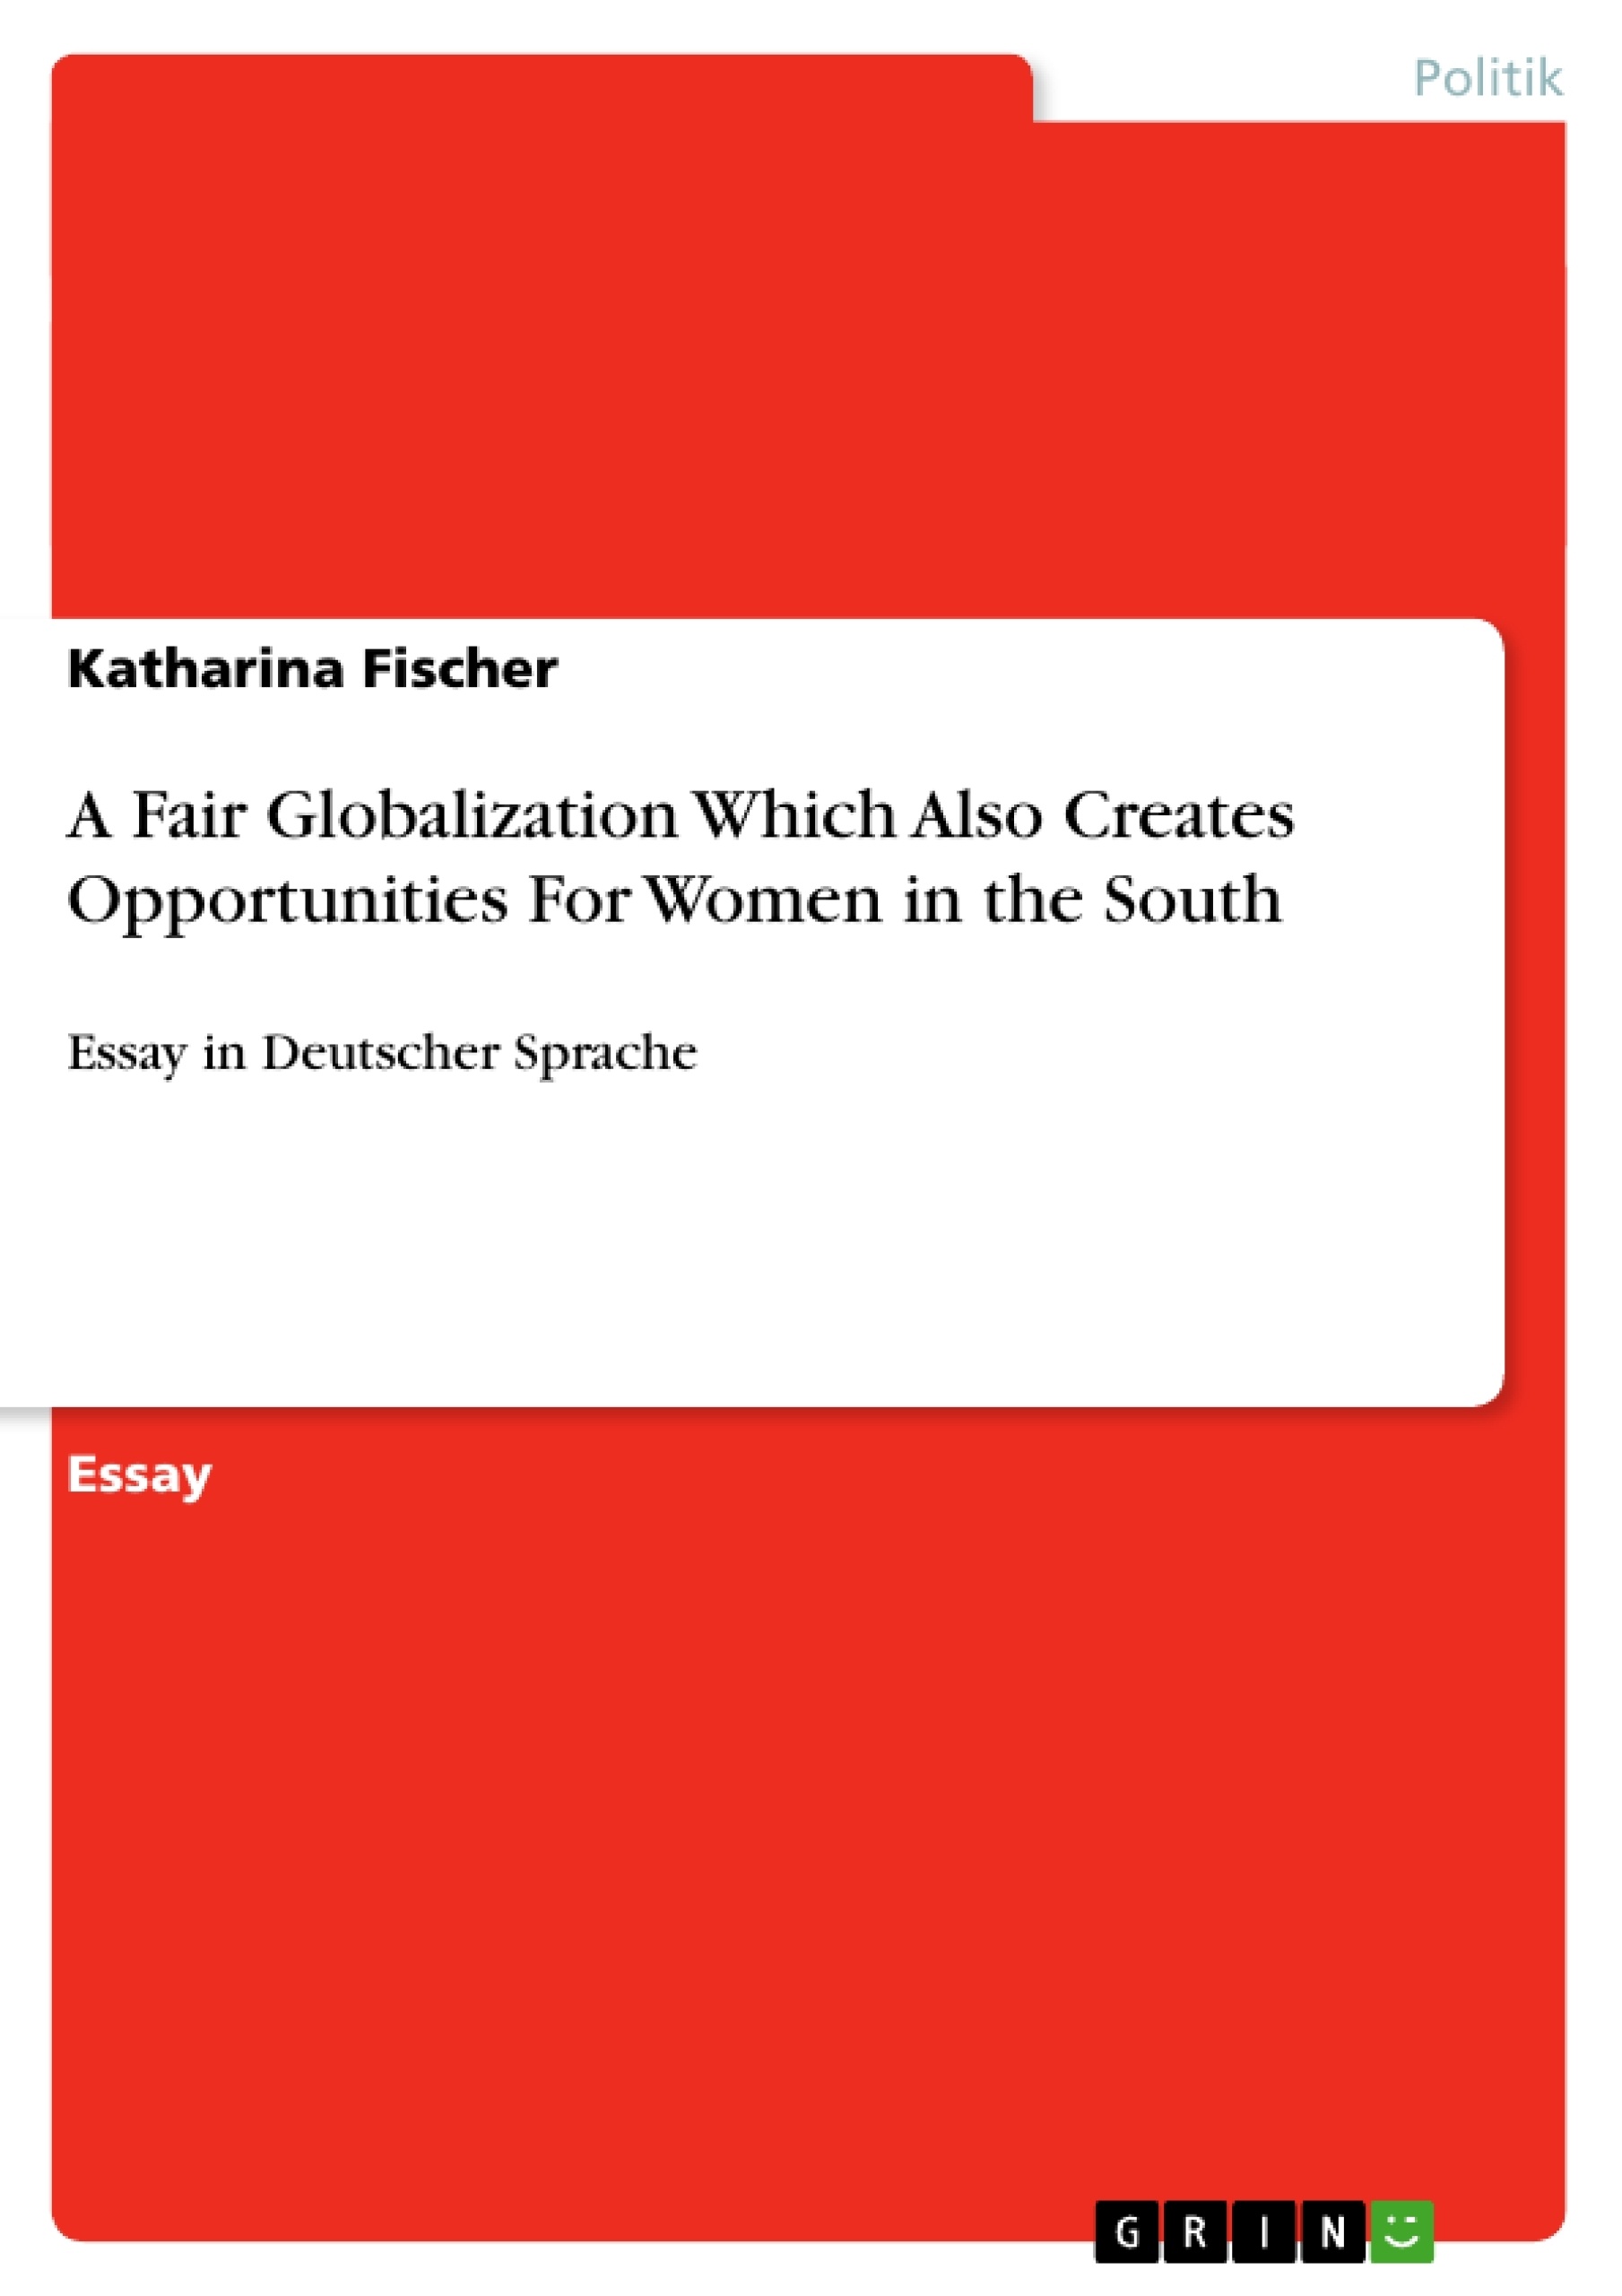 Titel: A Fair Globalization Which Also Creates Opportunities For Women in the South